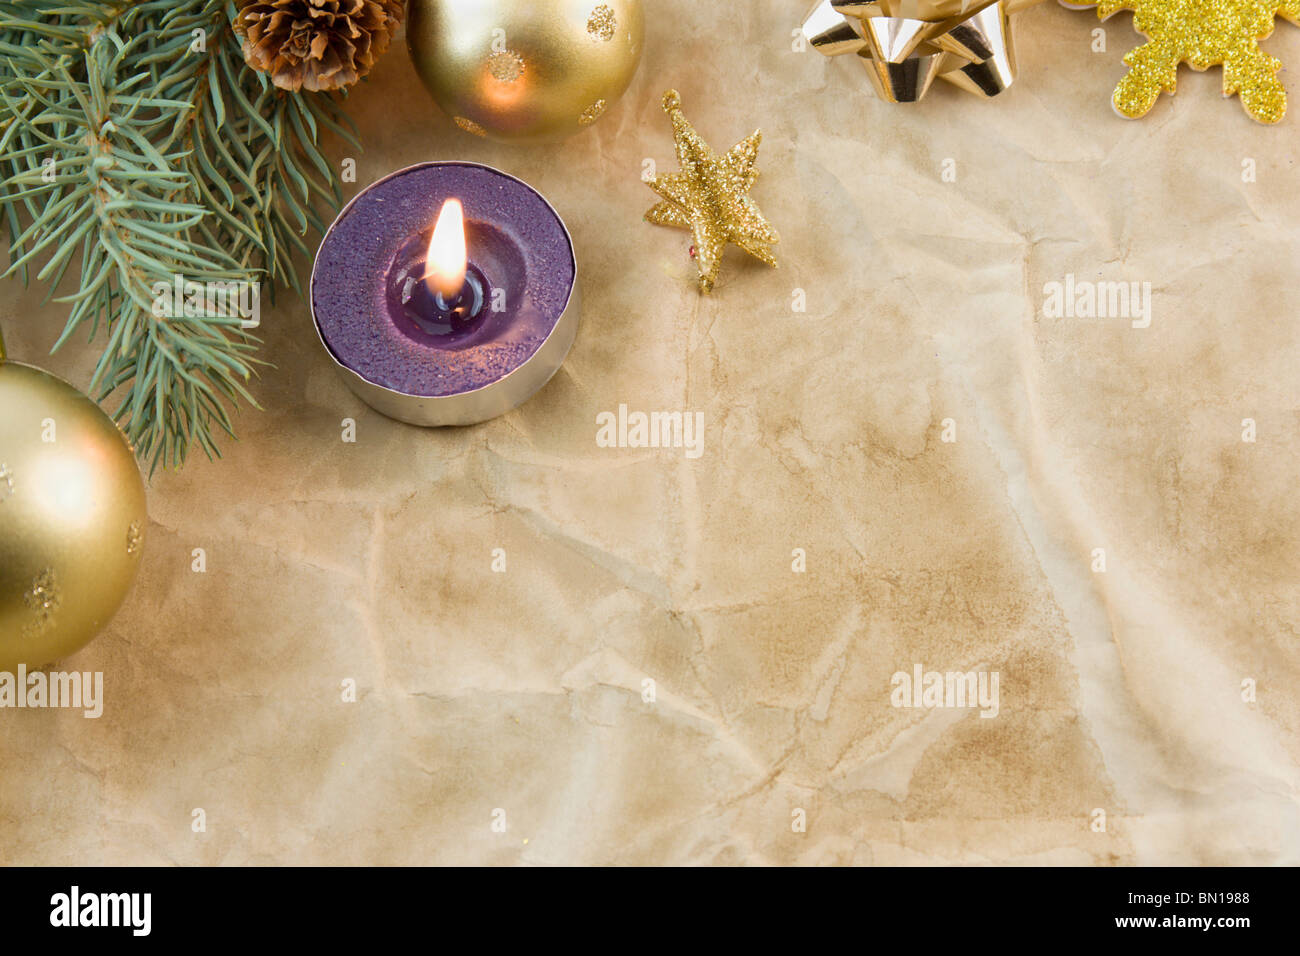 single purple tea light candle with gold christmas elements on antique paper with copyspace Stock Photo